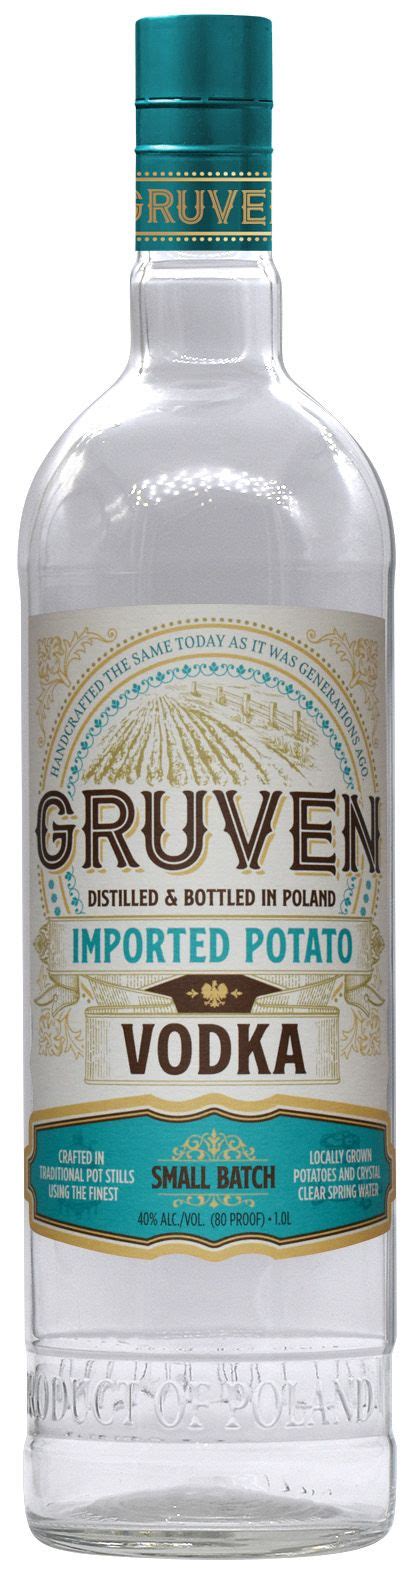 The company selects the finest potatoes and produced with the artful science of handcraft distillation. Gruven Handcrafted Potato Vodka